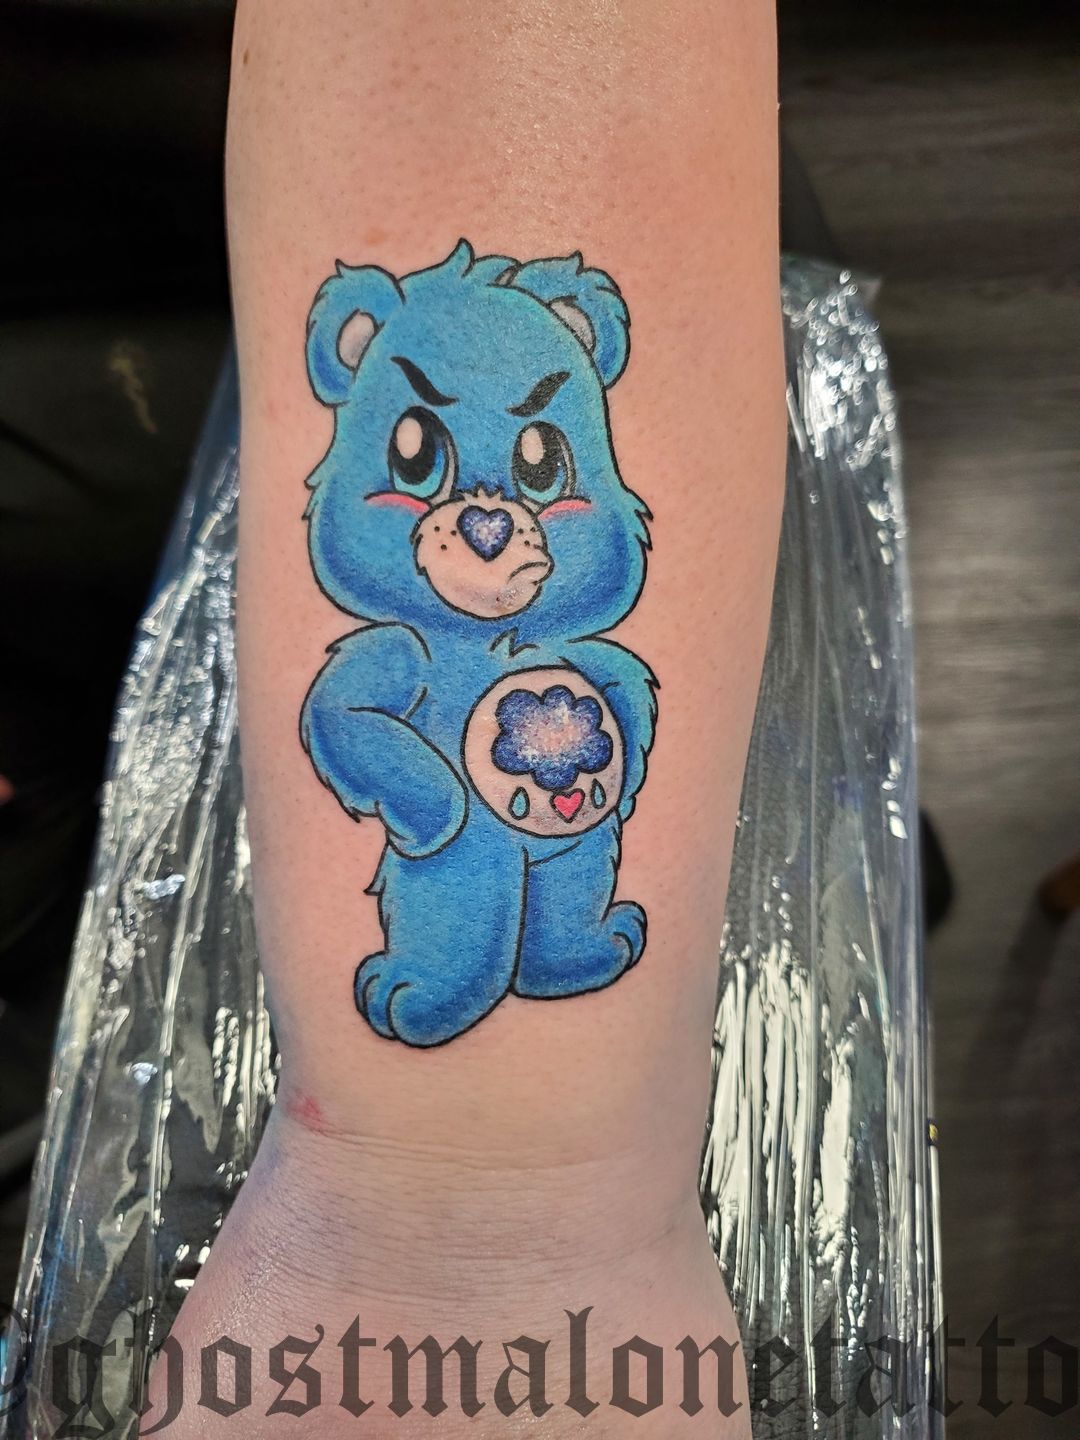 Yago on Twitter Scar cover with CareBear grimaces and chubby stars for  Cathy  carebears carebeartattoo bisounours bisounourstattoo  scarcoveruptattoo httpstcoWd4qJX7r4J  Twitter